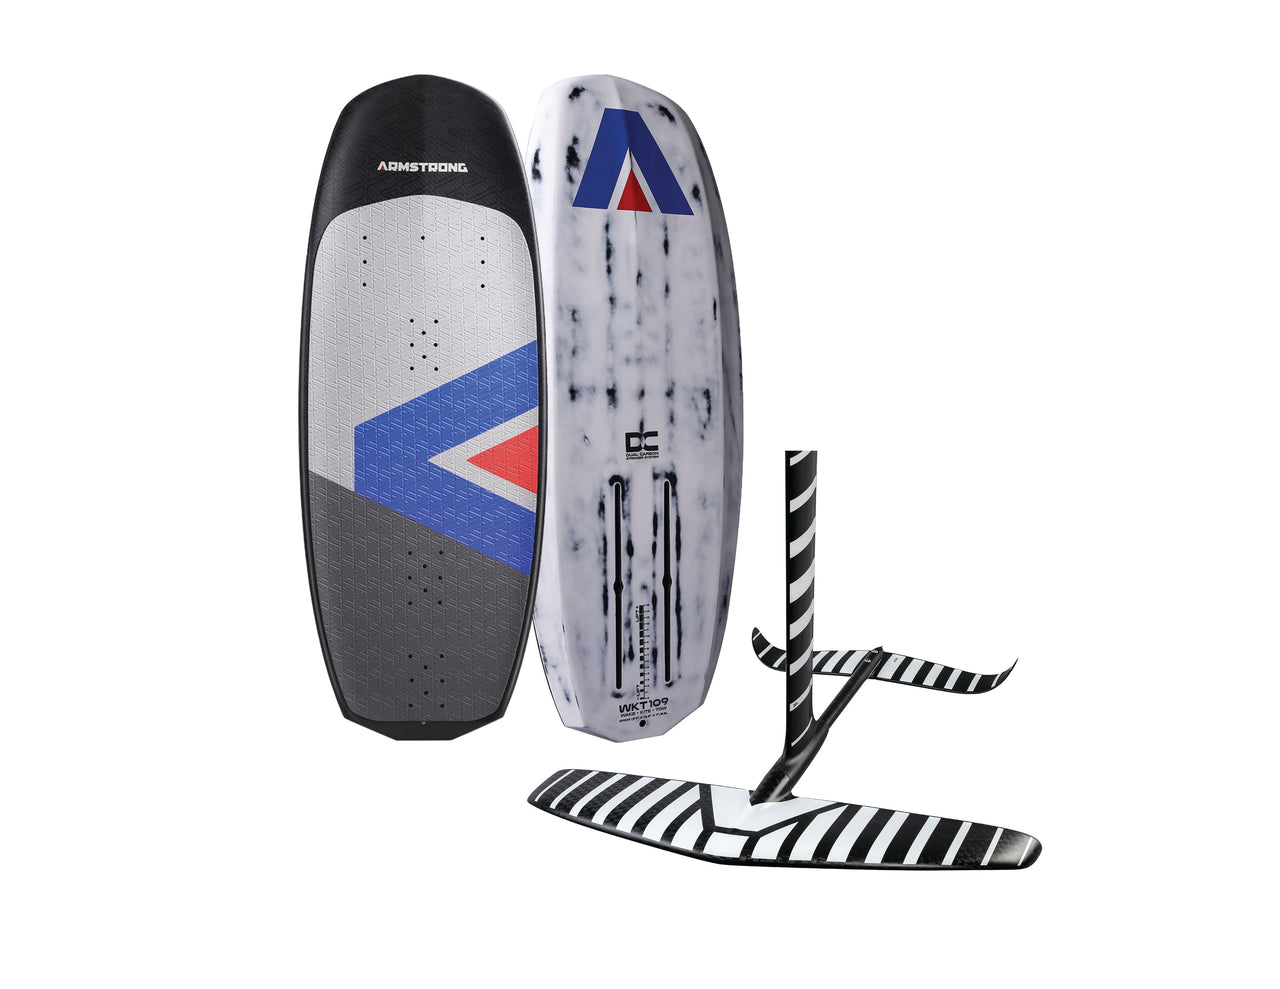 Armstrong Wakefoil Board W/ Armstrong CF1200 Foil Kit Package